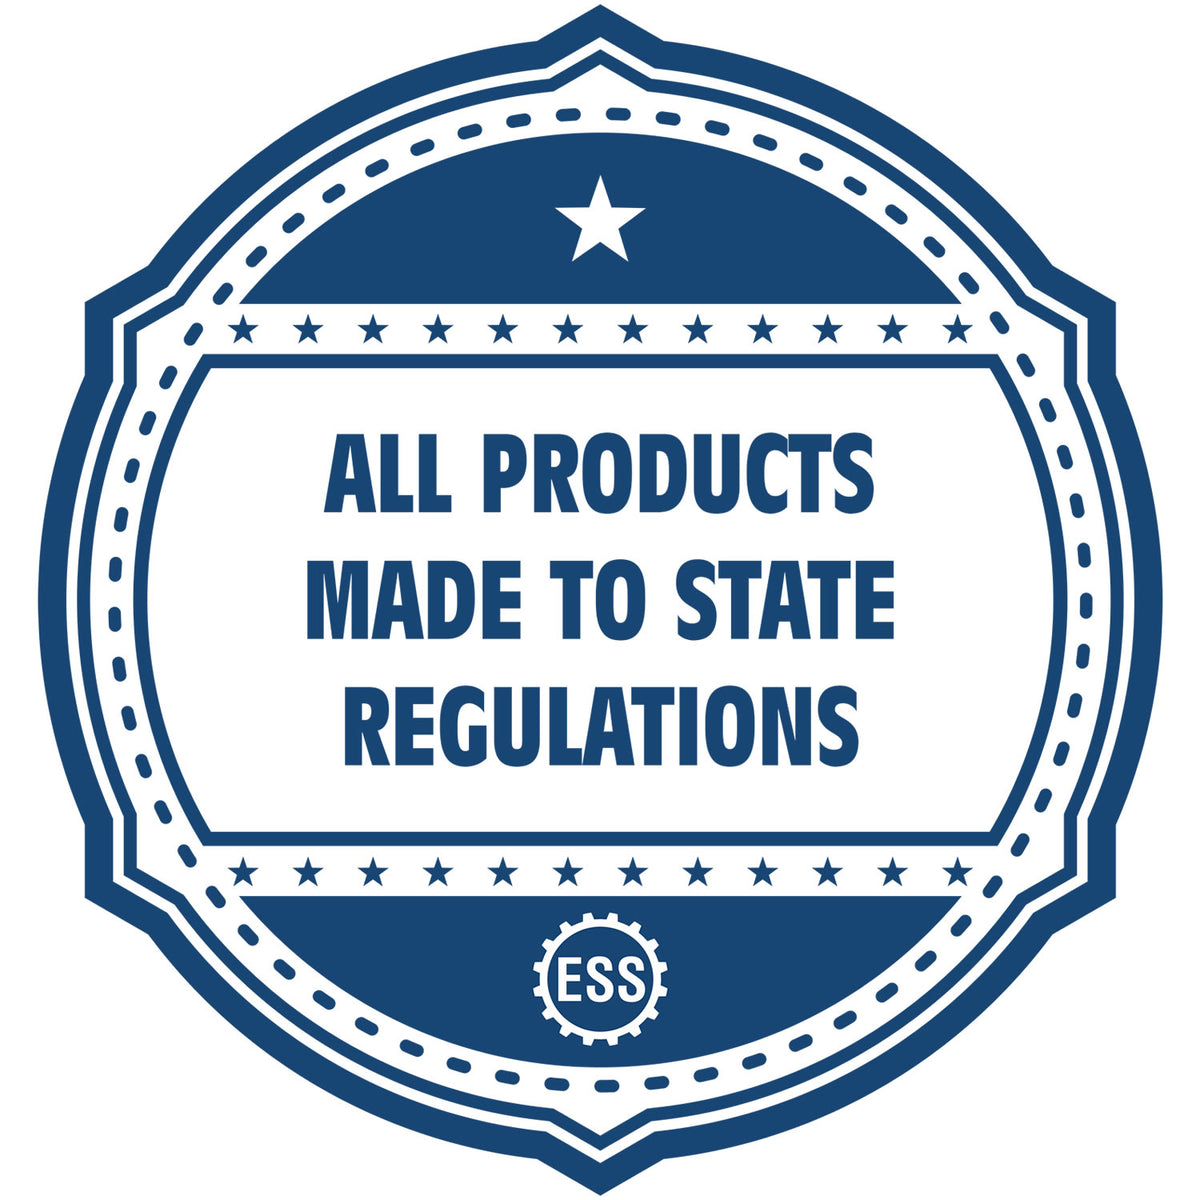 An icon or badge element for the Slim Pre-Inked Missouri Land Surveyor Seal Stamp showing that this product is made in compliance with state regulations.